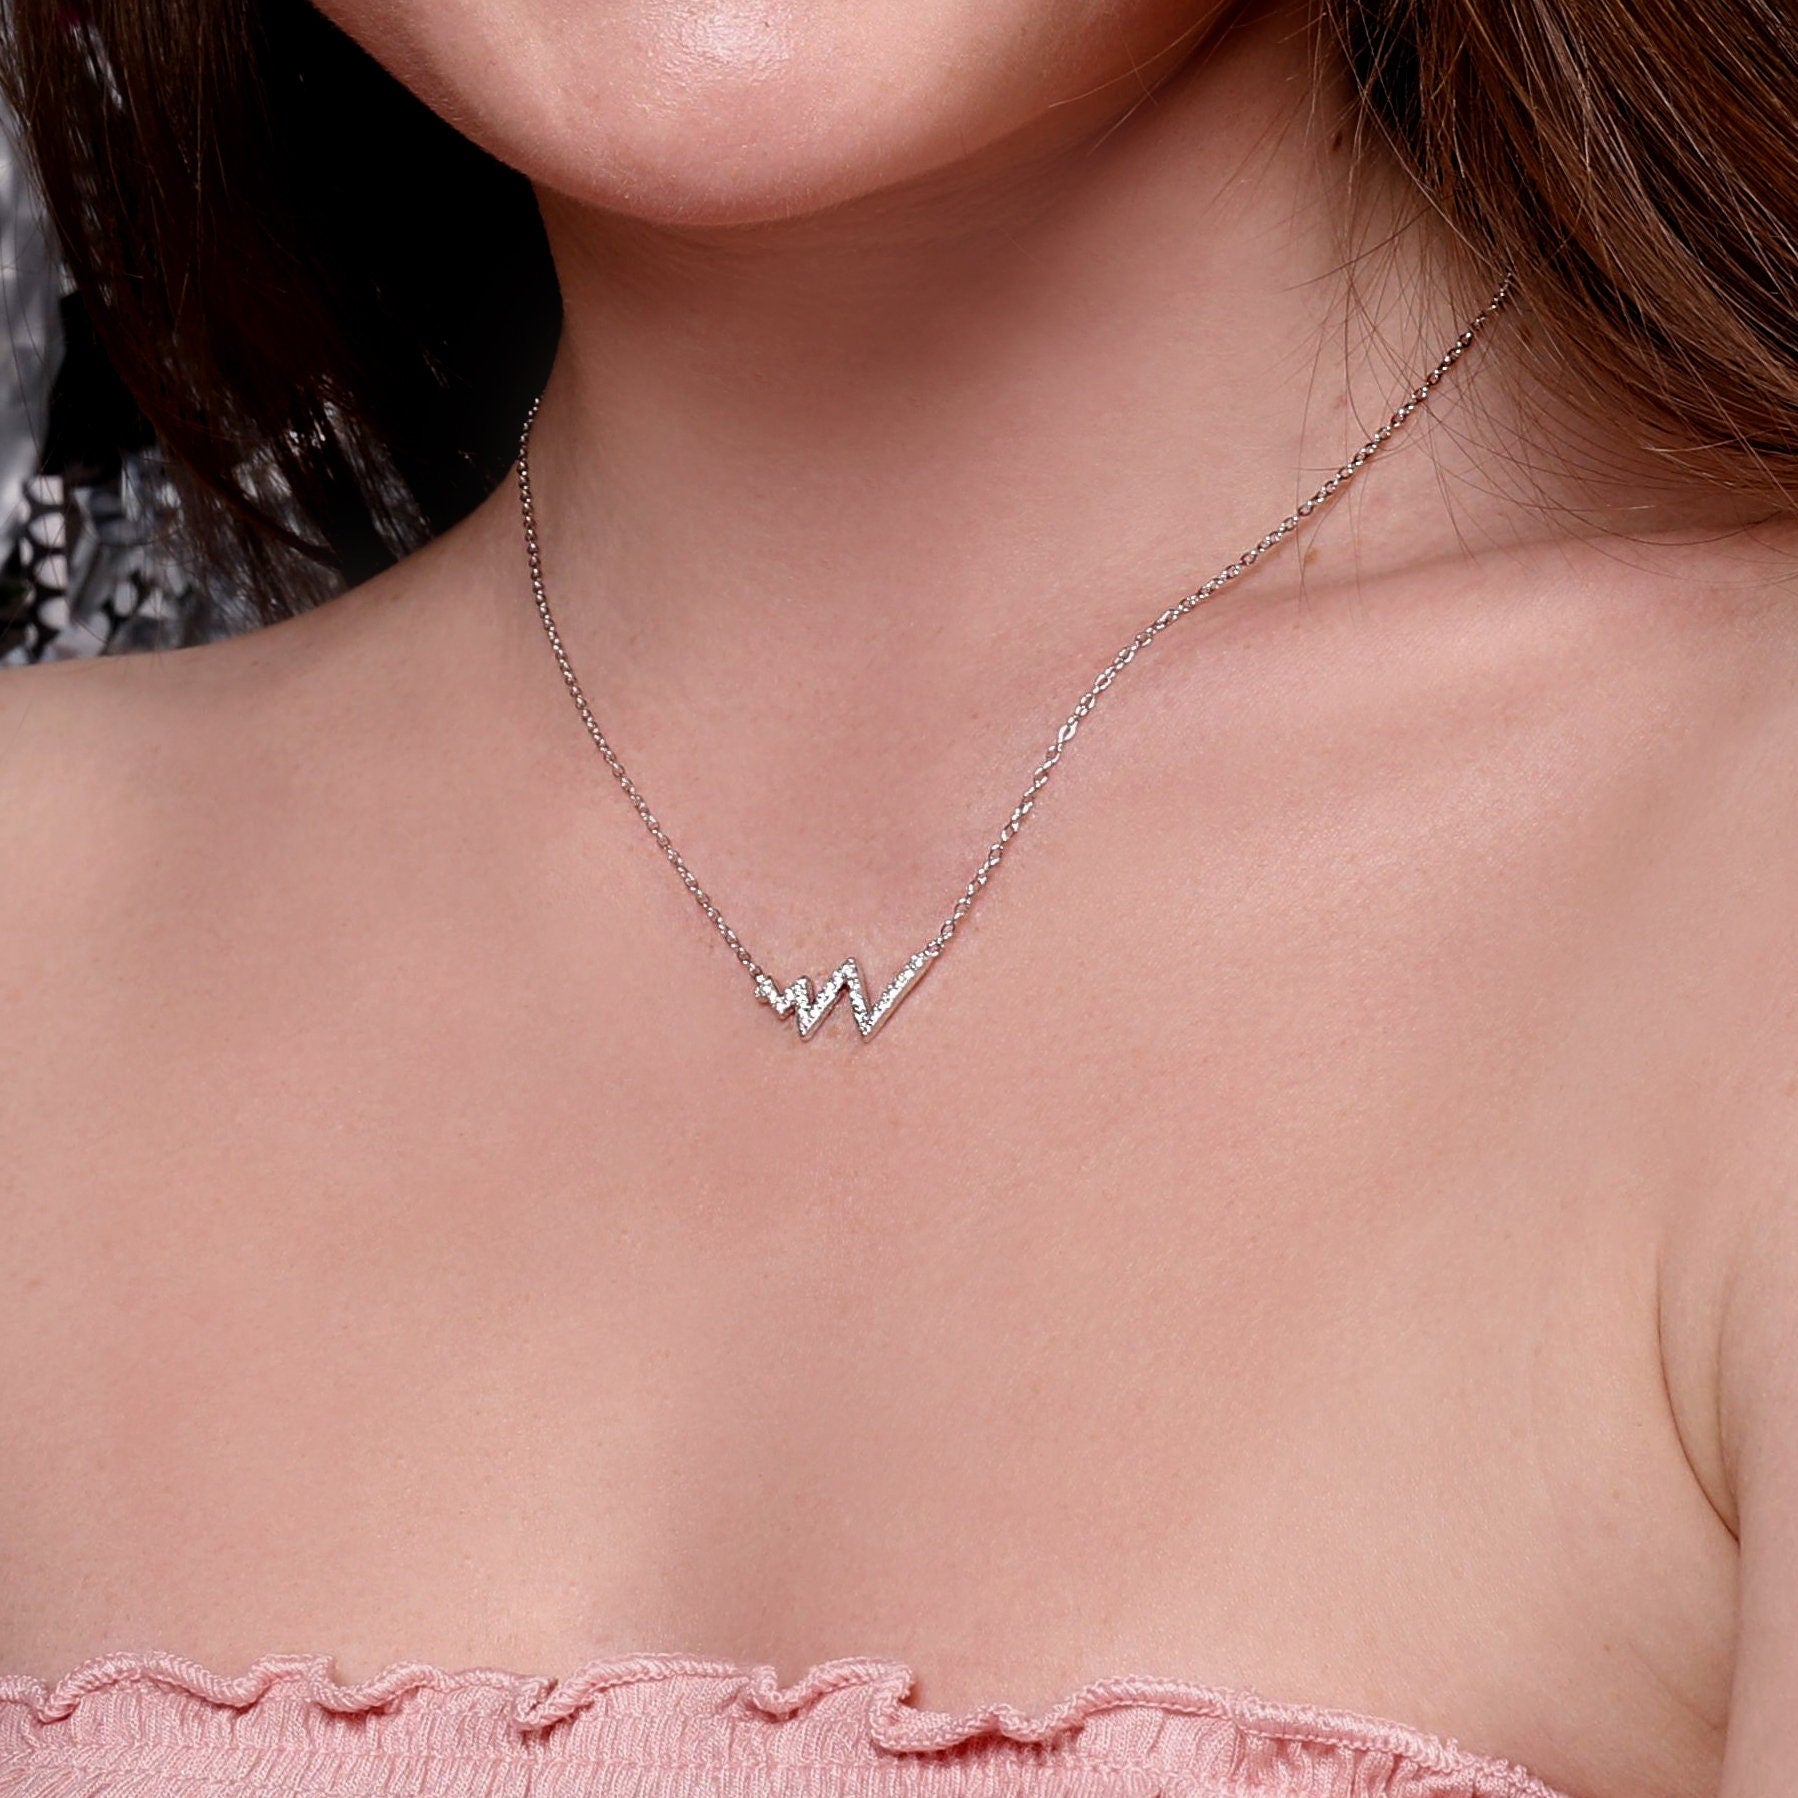 Amy - Stunning Silver Necklace Pendant, Sterling Silver Jewelry, Heart Beat Necklace, Gift for Her, Bridesmaid Gift, Necklace for Women,